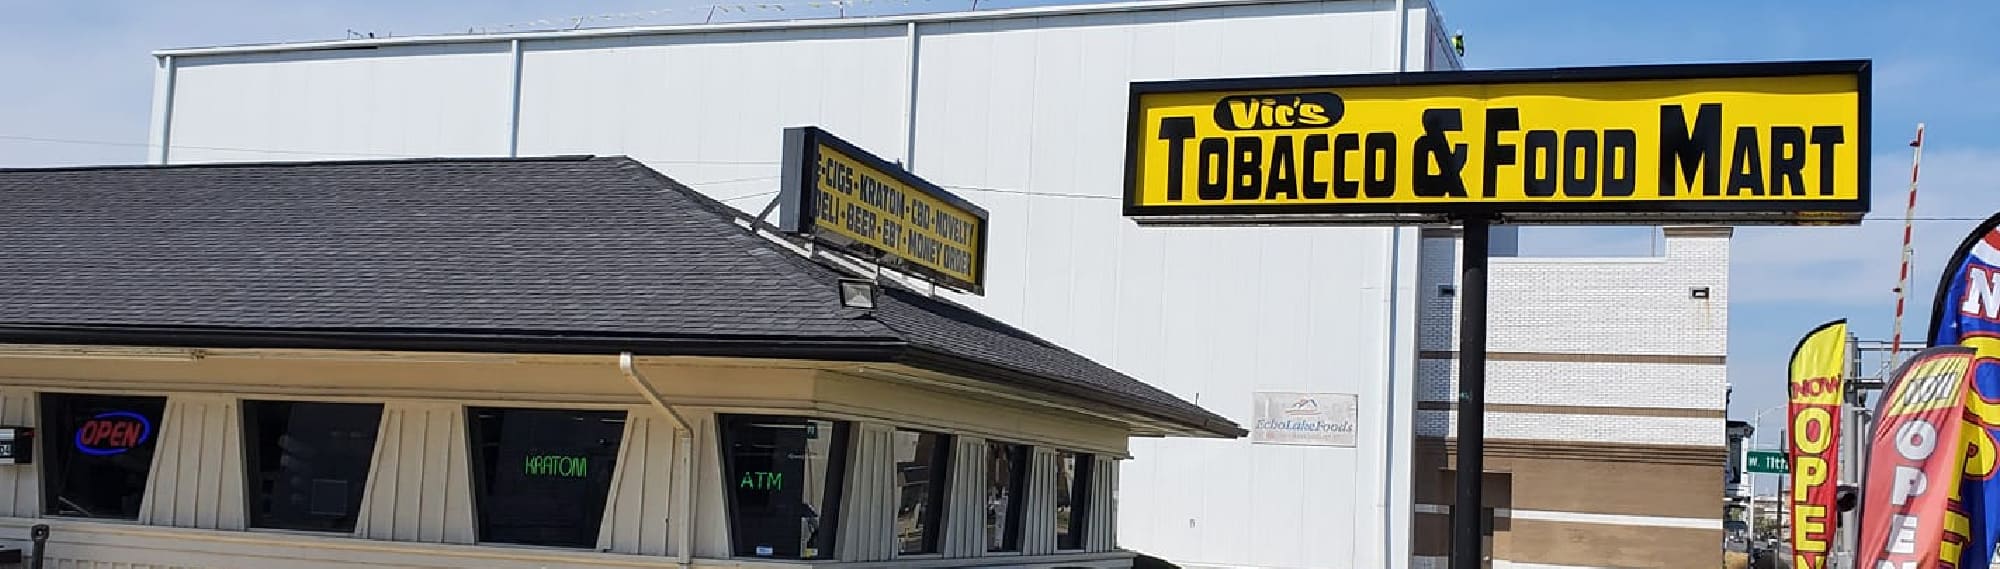 image of vic's tobacco & food mart in owensboro ky